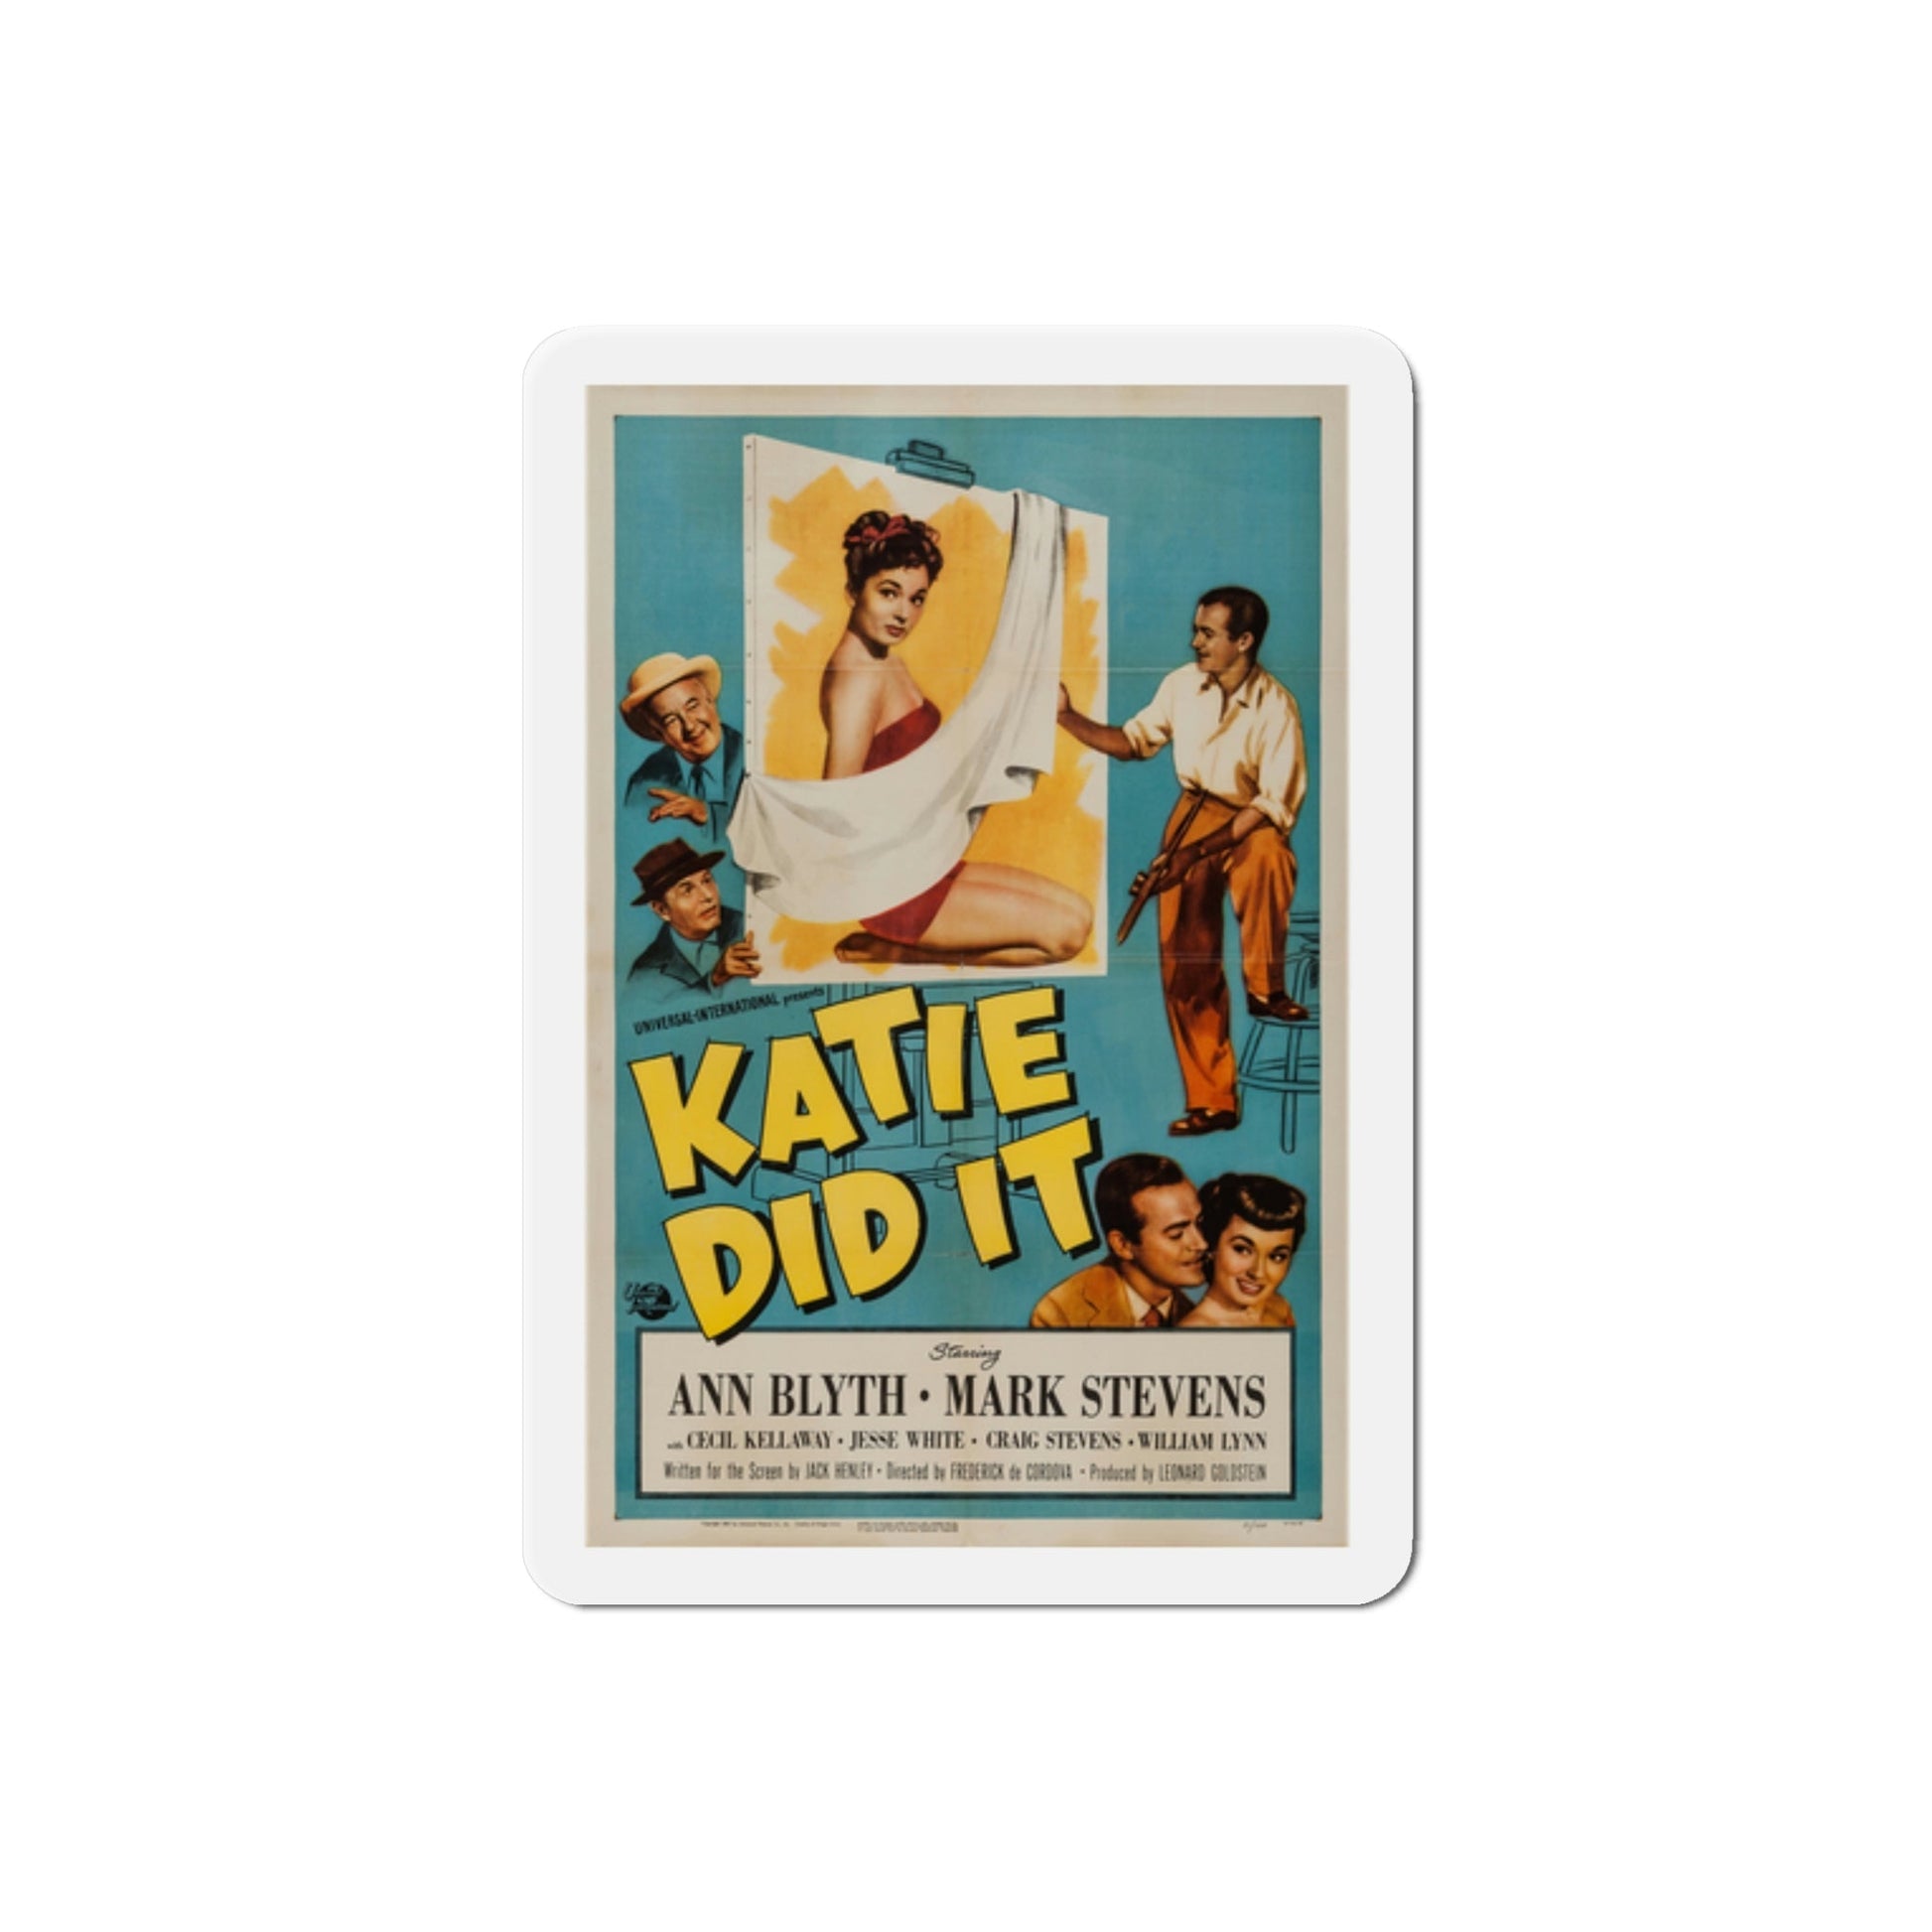 GIFT IDEAS FOR WOMEN - Katie Did What